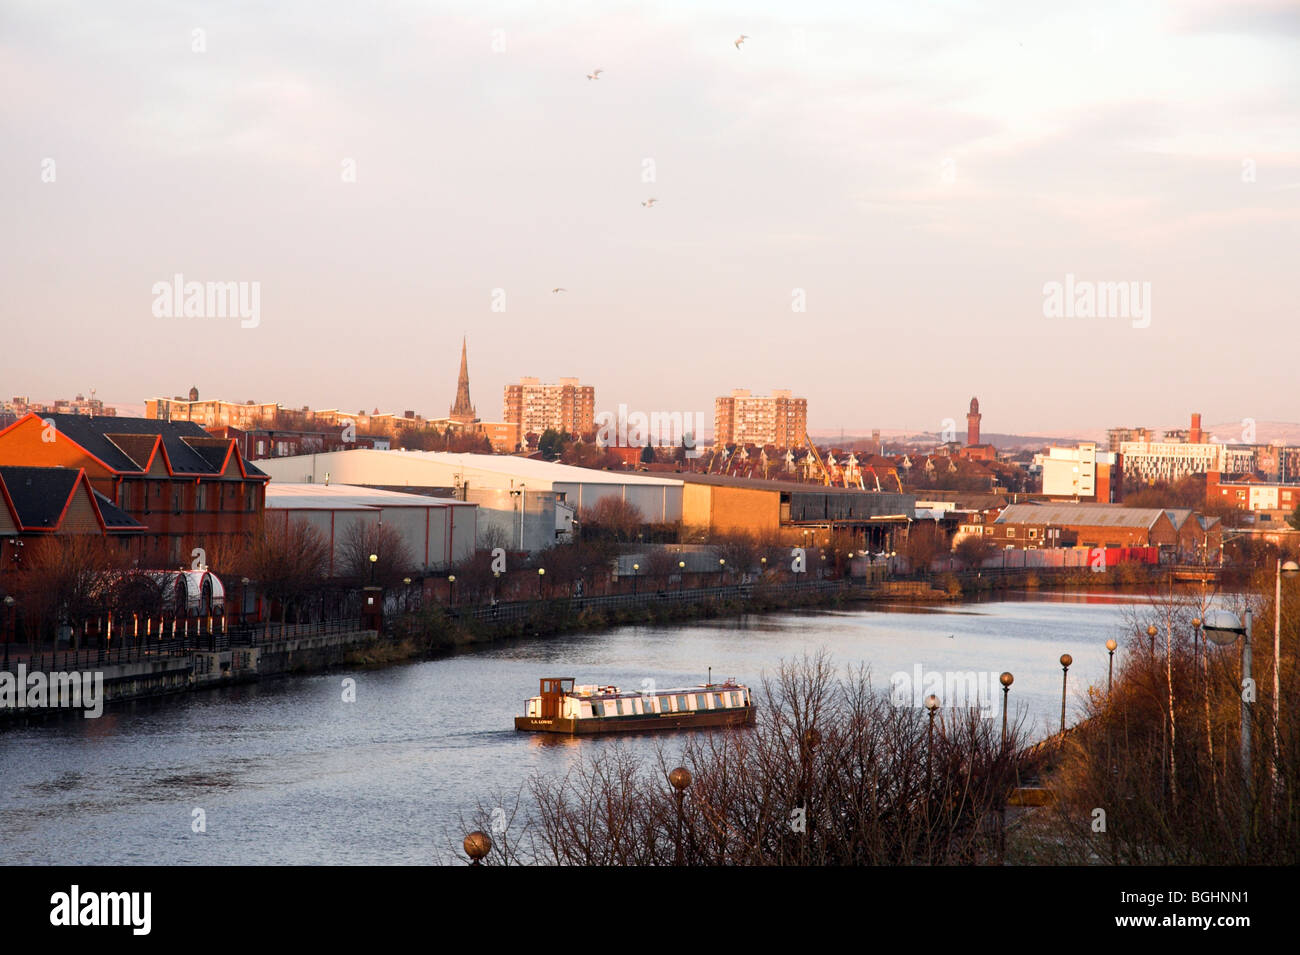 Manchester Ship Canal, Pomona Docks, Salford Quays, Old Trafford, Manchester, UK Stock Photo